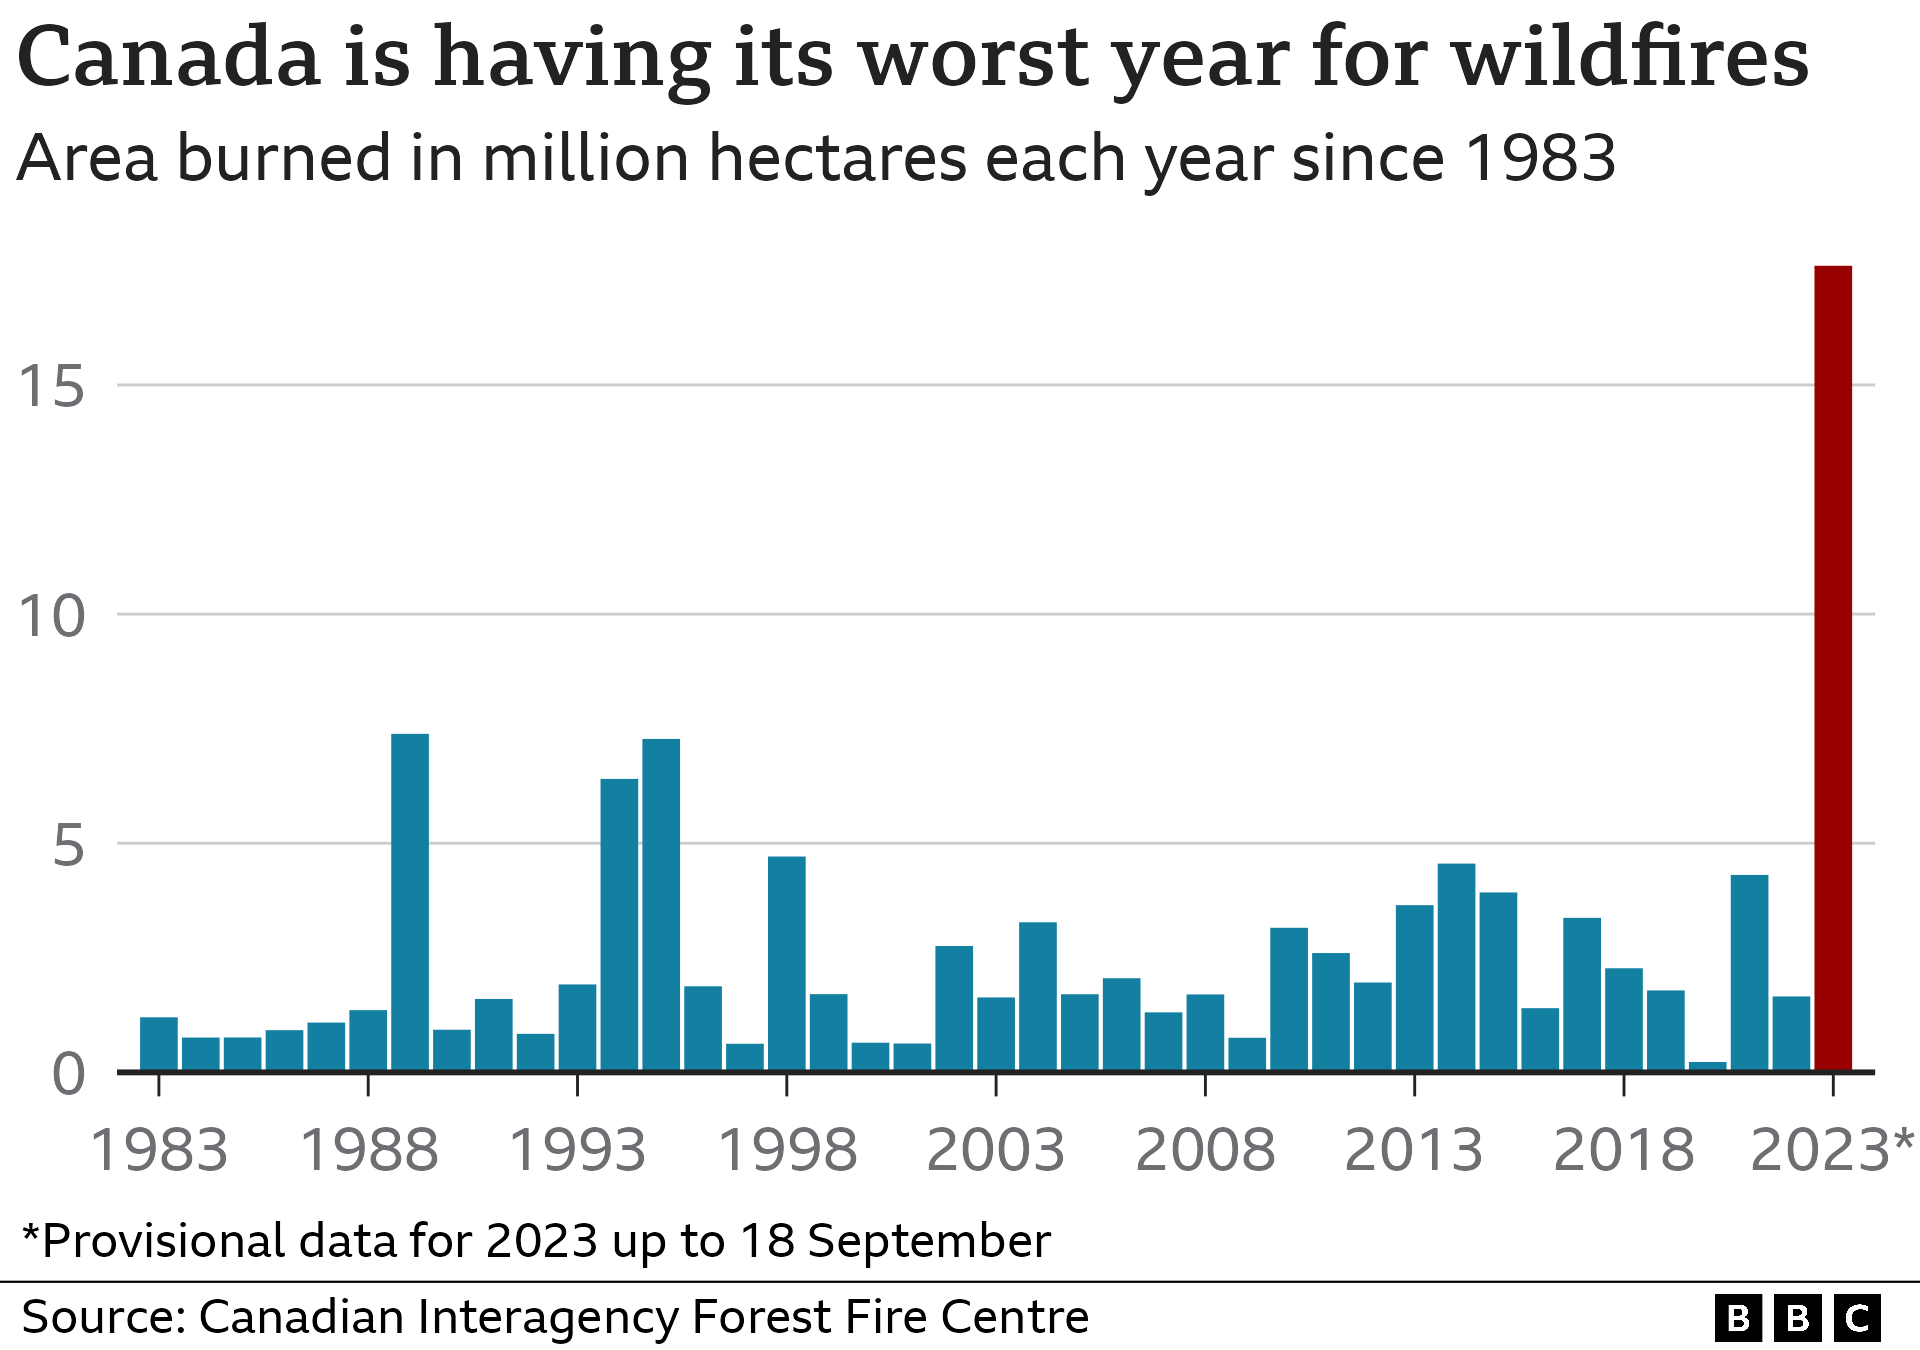 Bar chart showing area burned in Canada each year since 1983. In 2023, 17.6 million hectares has been burned already. No previous year had reached 8 million hectares.